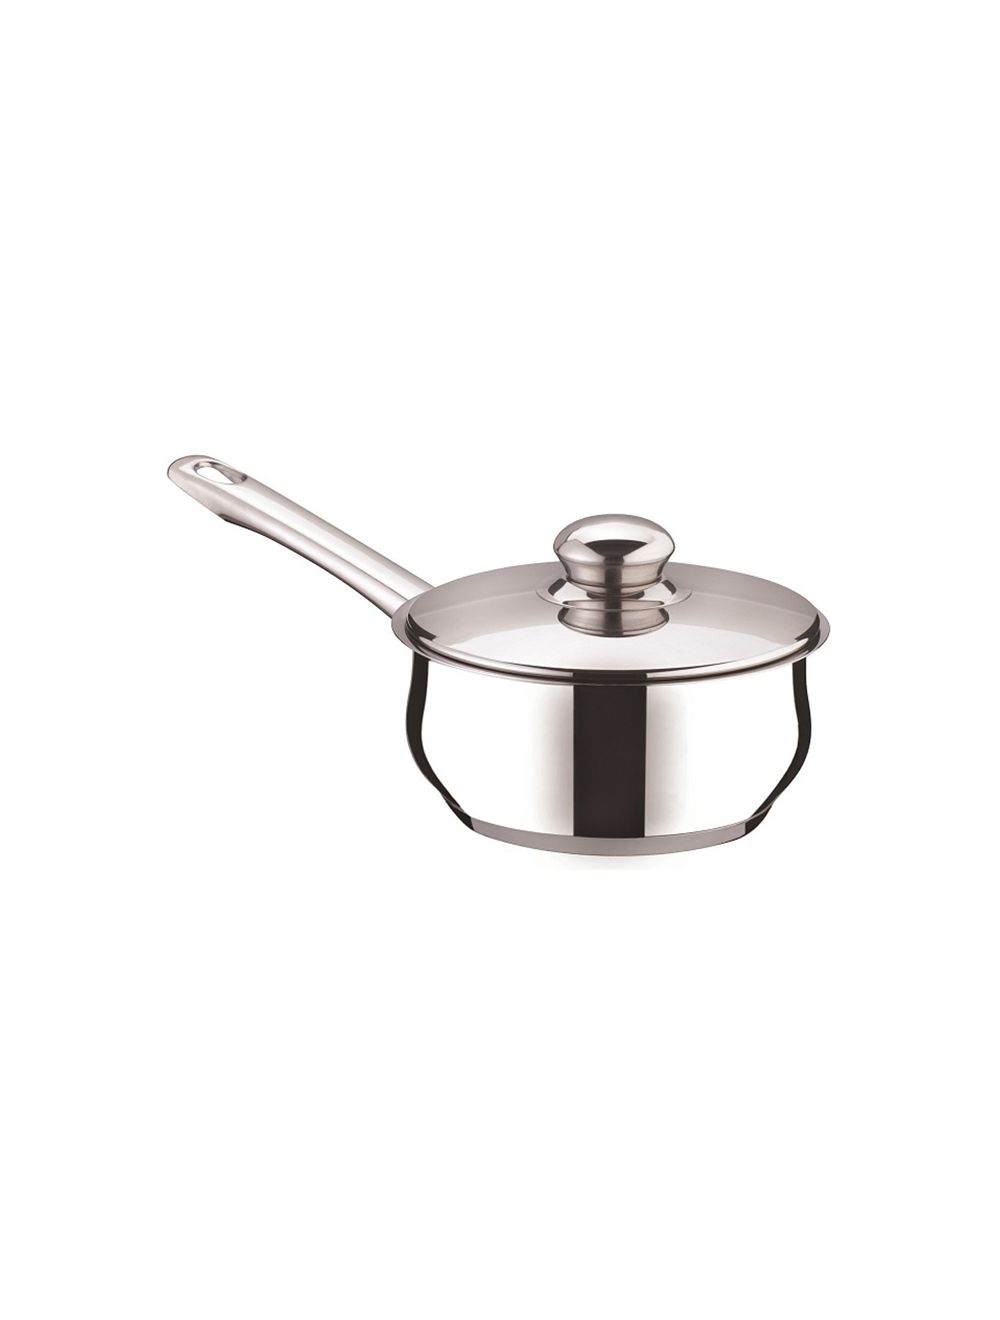 Stainless Steel Sauce Pan With Lid 16 cm